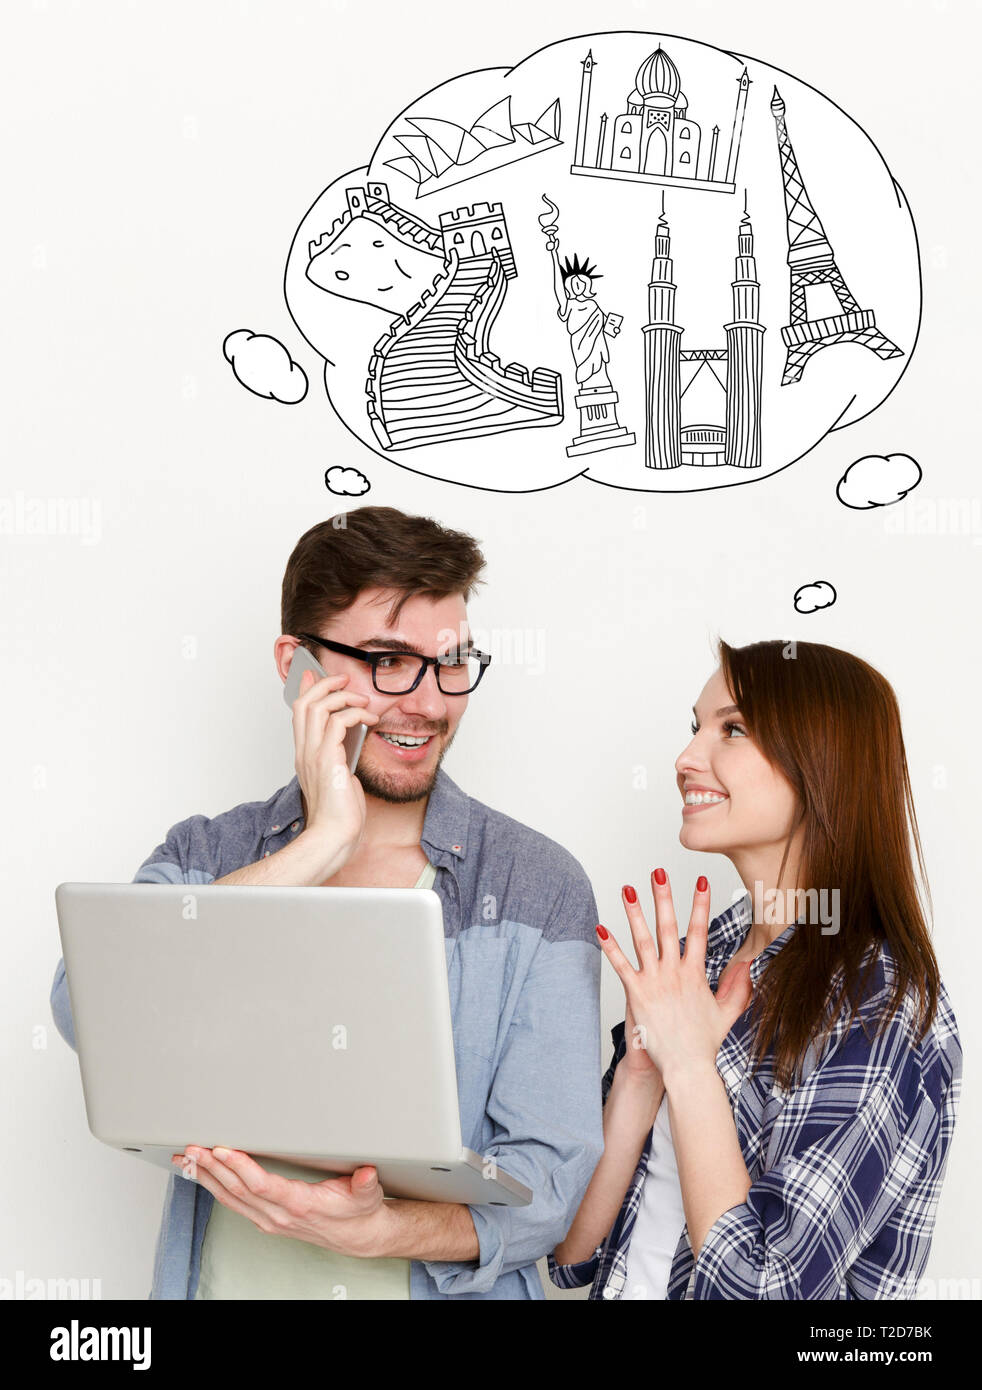 Happy couple choosing tour using laptop at white backround with drawn cloud full of world sights simbols . Travel agency online concept Stock Photo